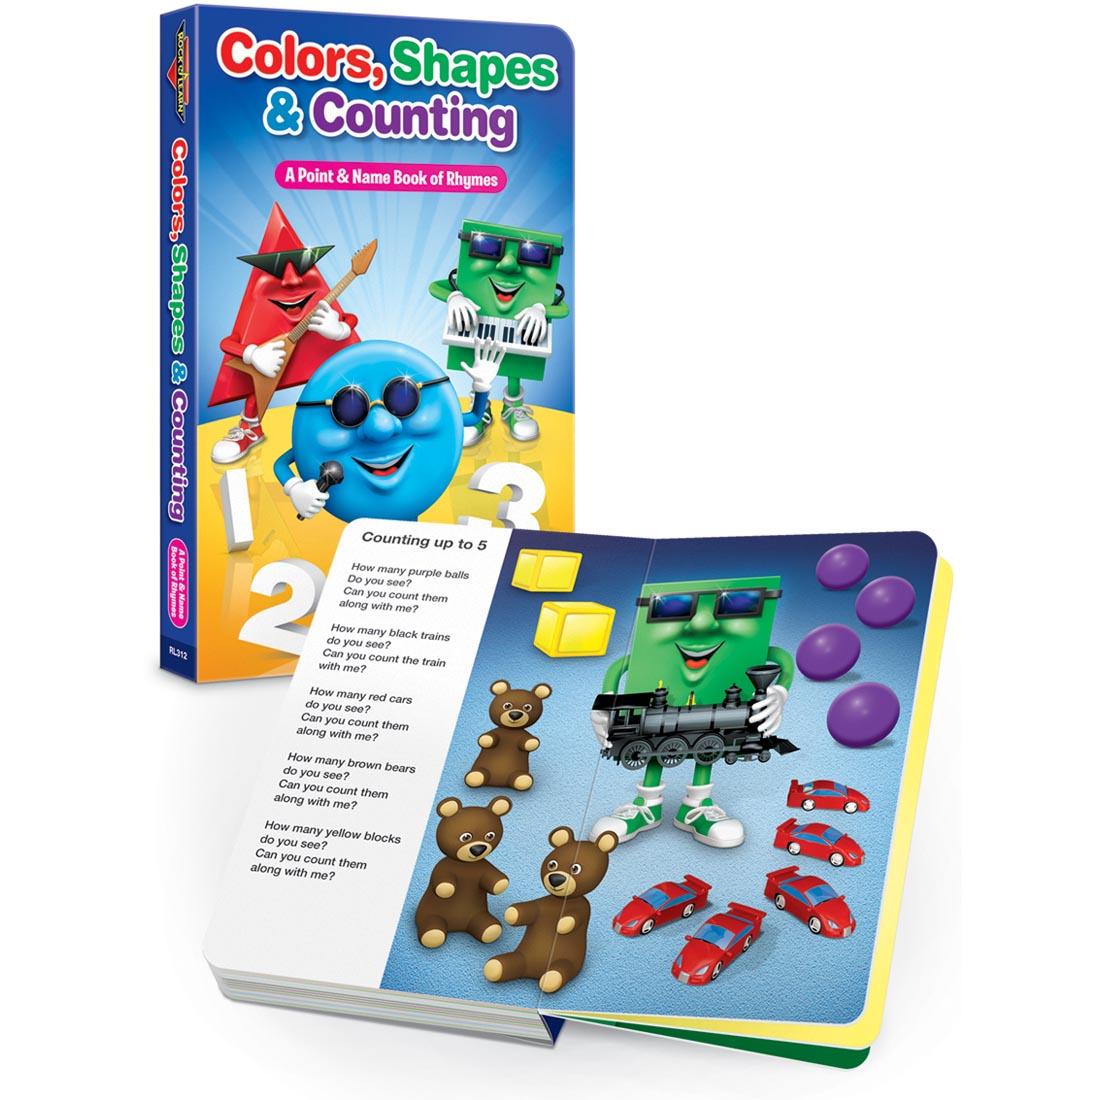 Colors, Shapes & Counting: A Point & Name Board Book of Rhymes shown both closed and open